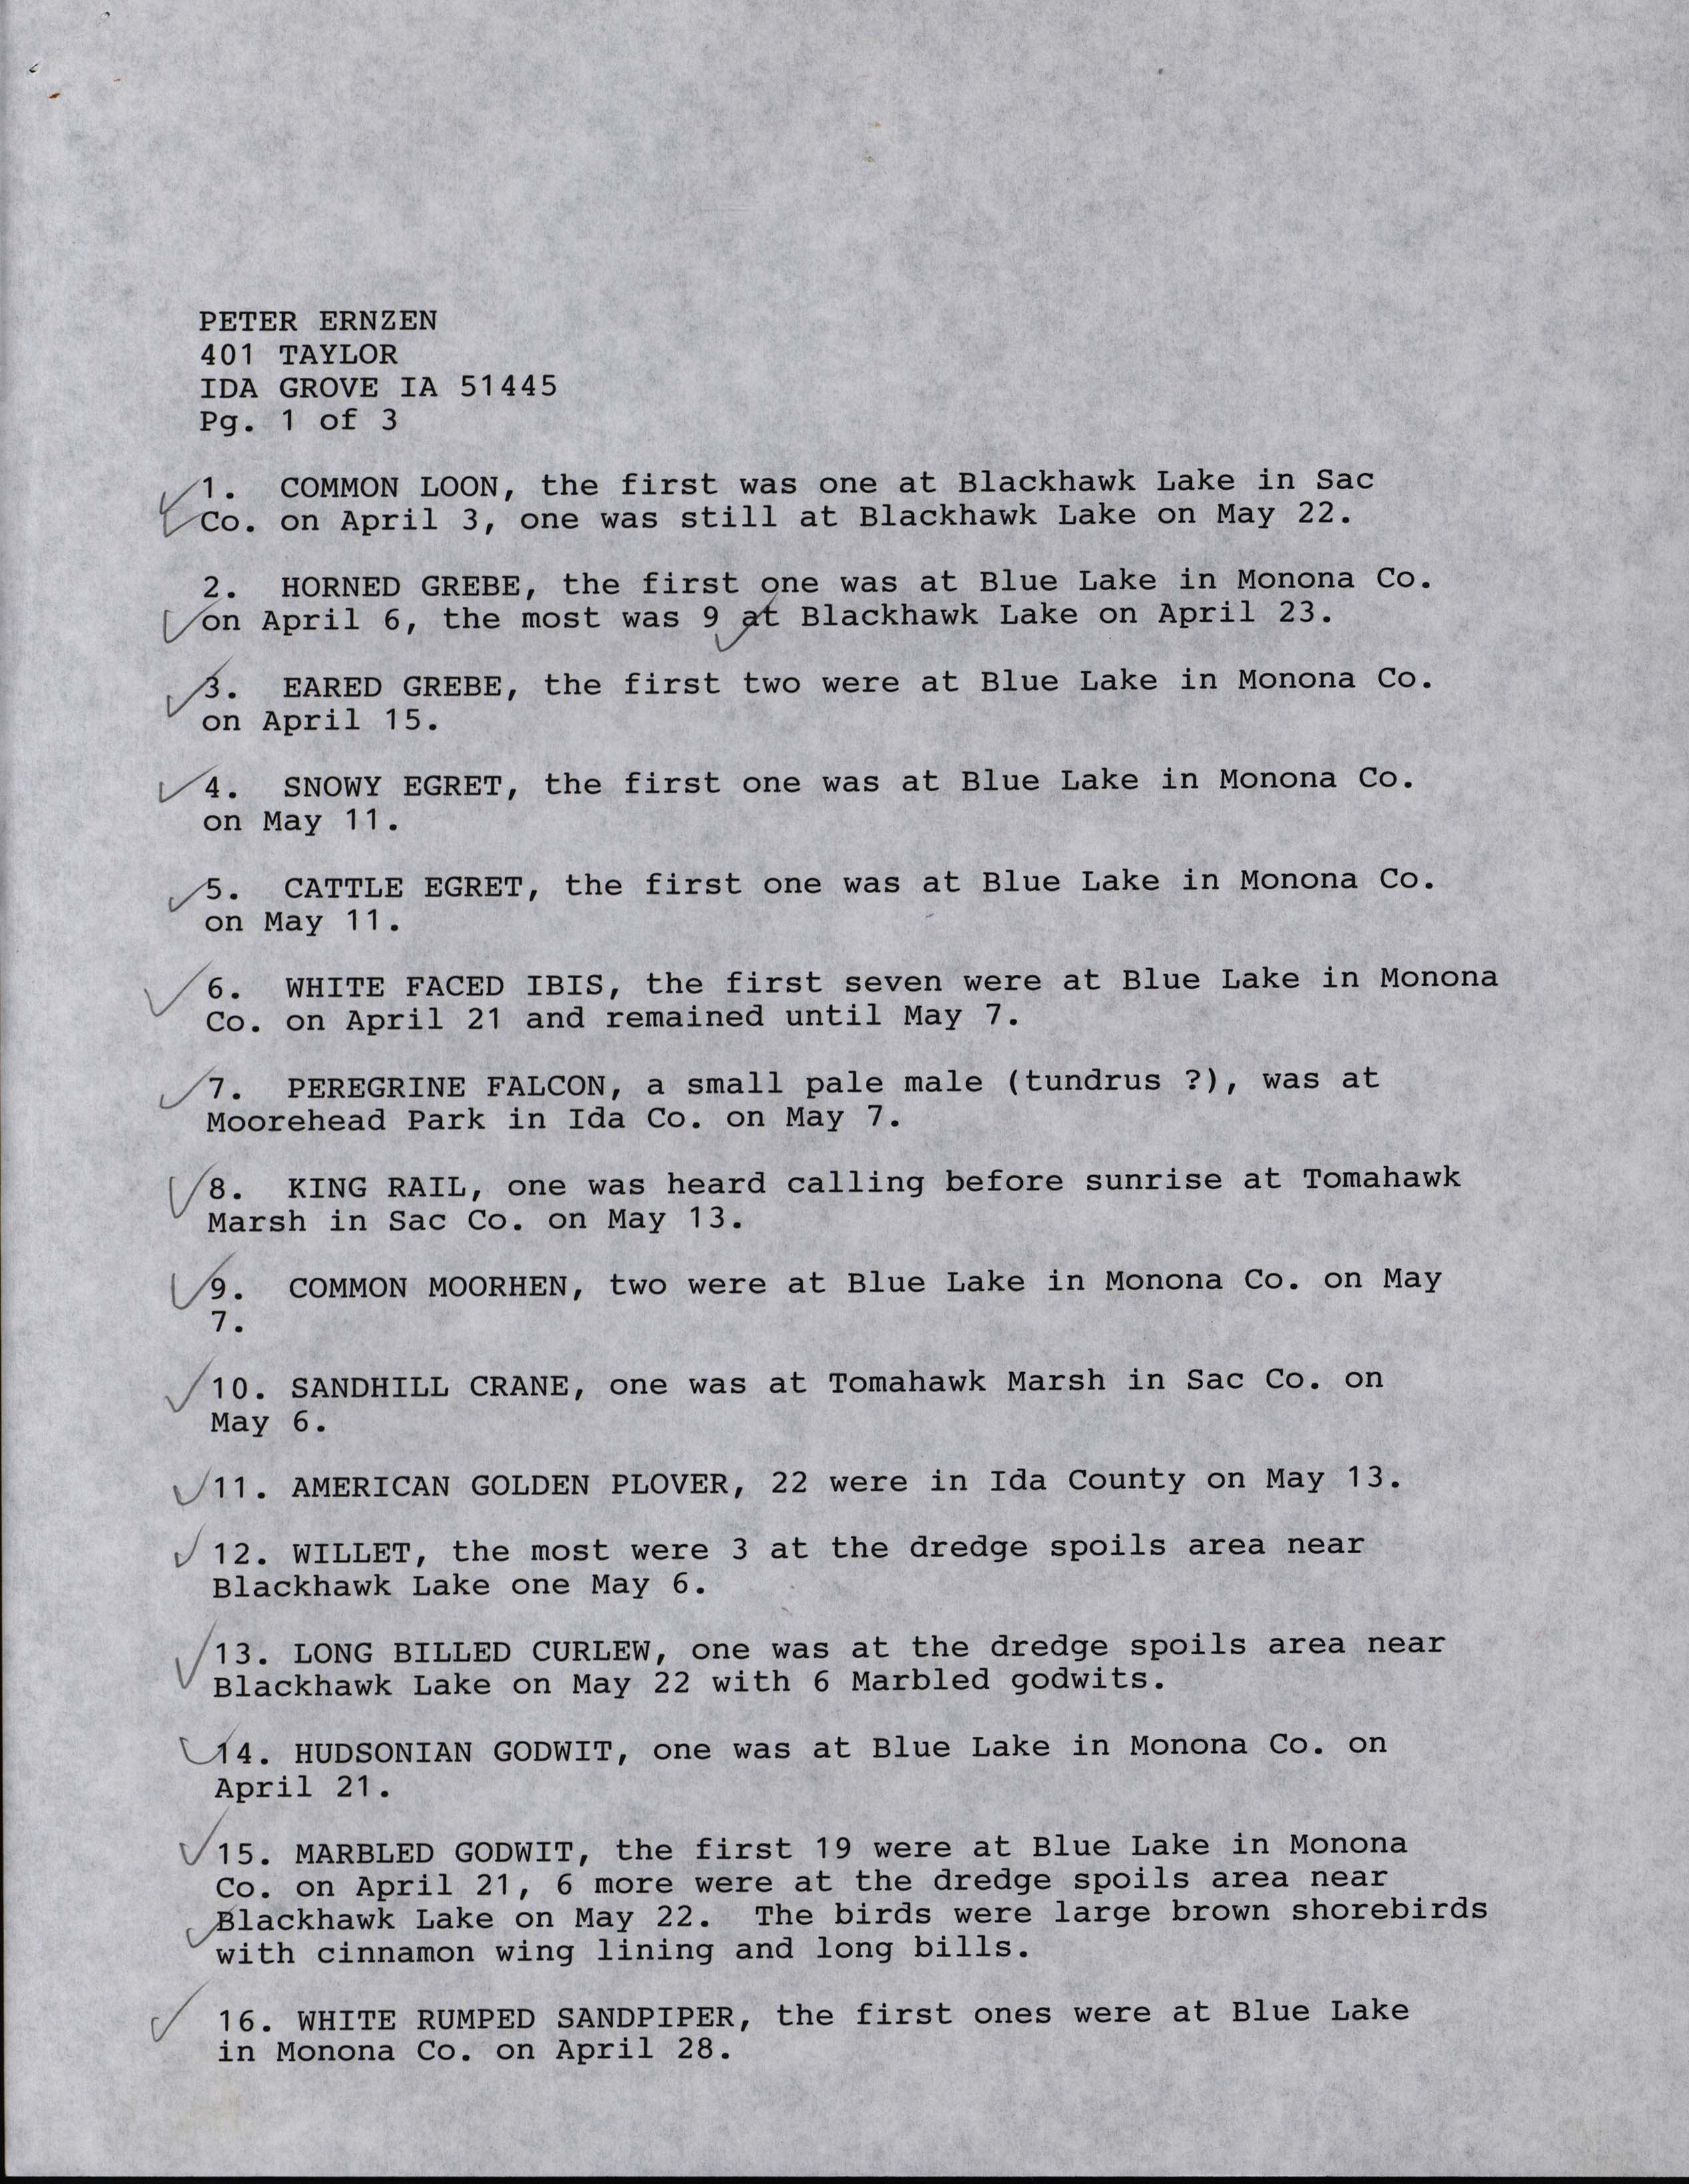 Annotated bird sighting list for spring 1995 compiled by Peter Ernzen